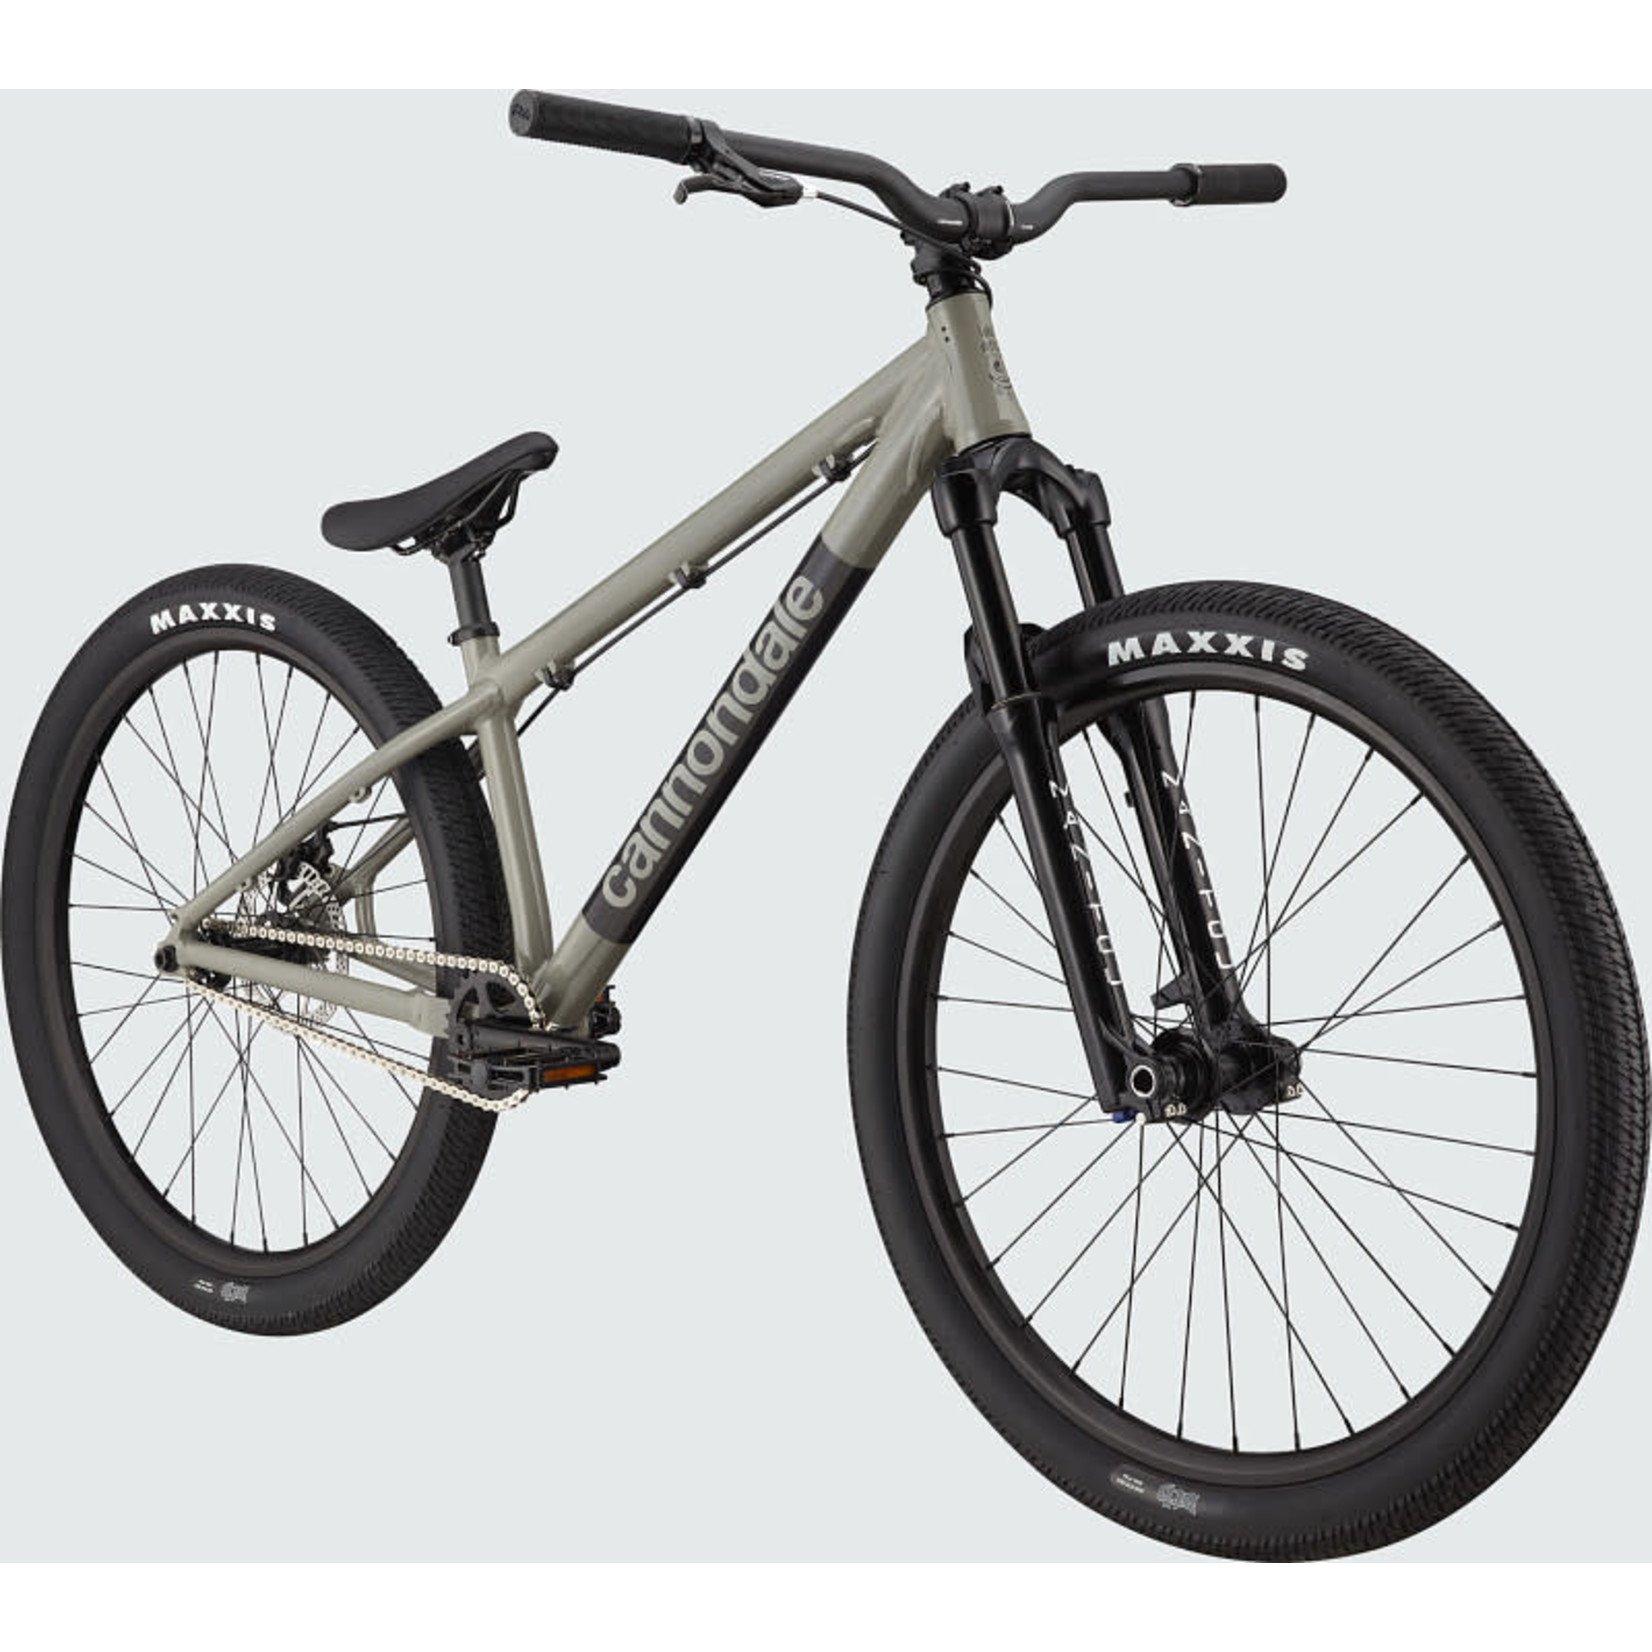 Cannondale CANNONDALE Dave vélo dirt jumper 26 syg Os X